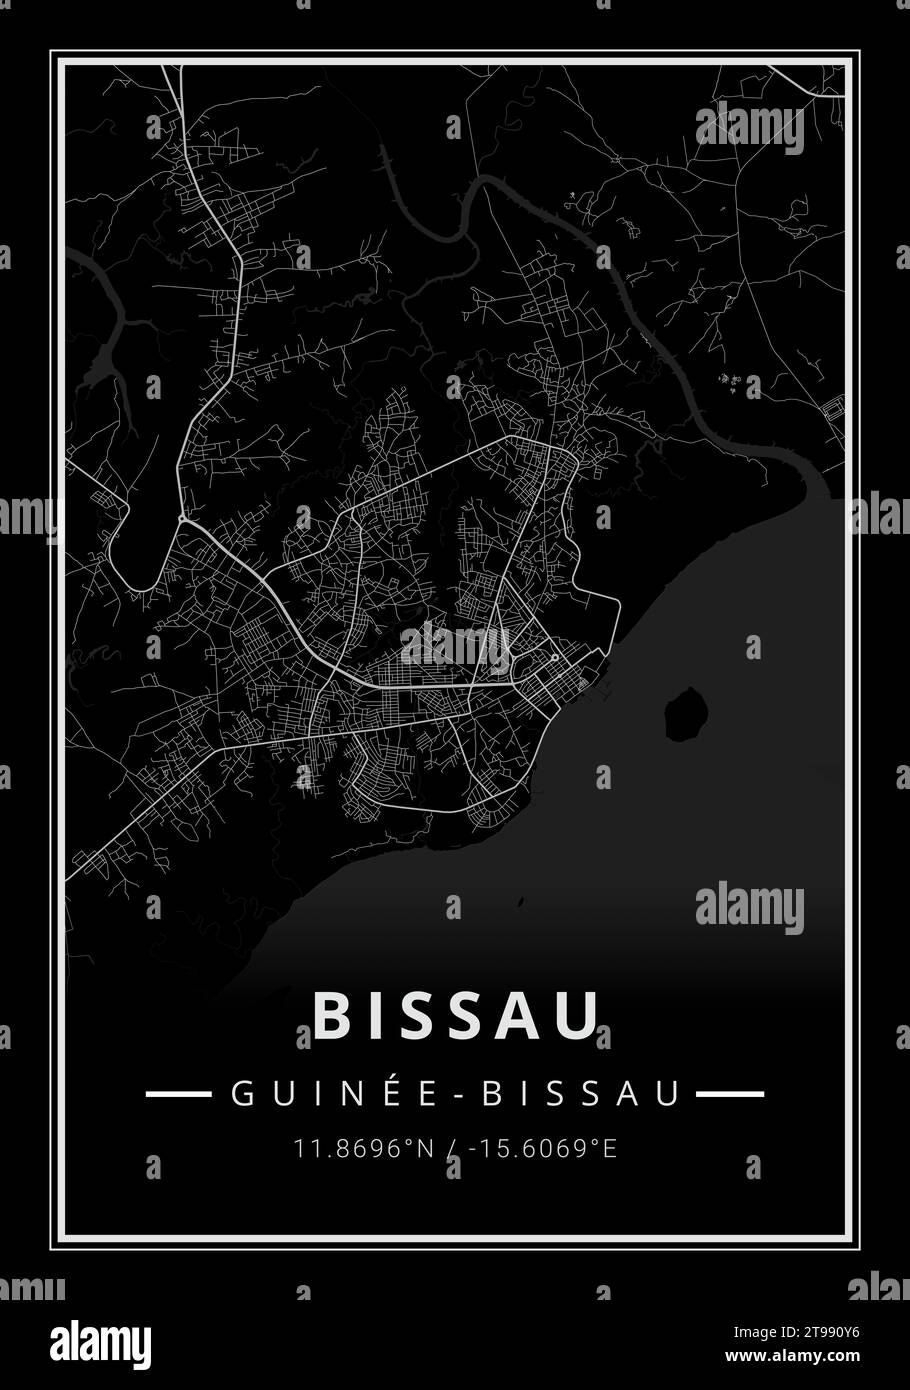 Street map art of Bissau city in Guinea Bissau - Africa Stock Photo